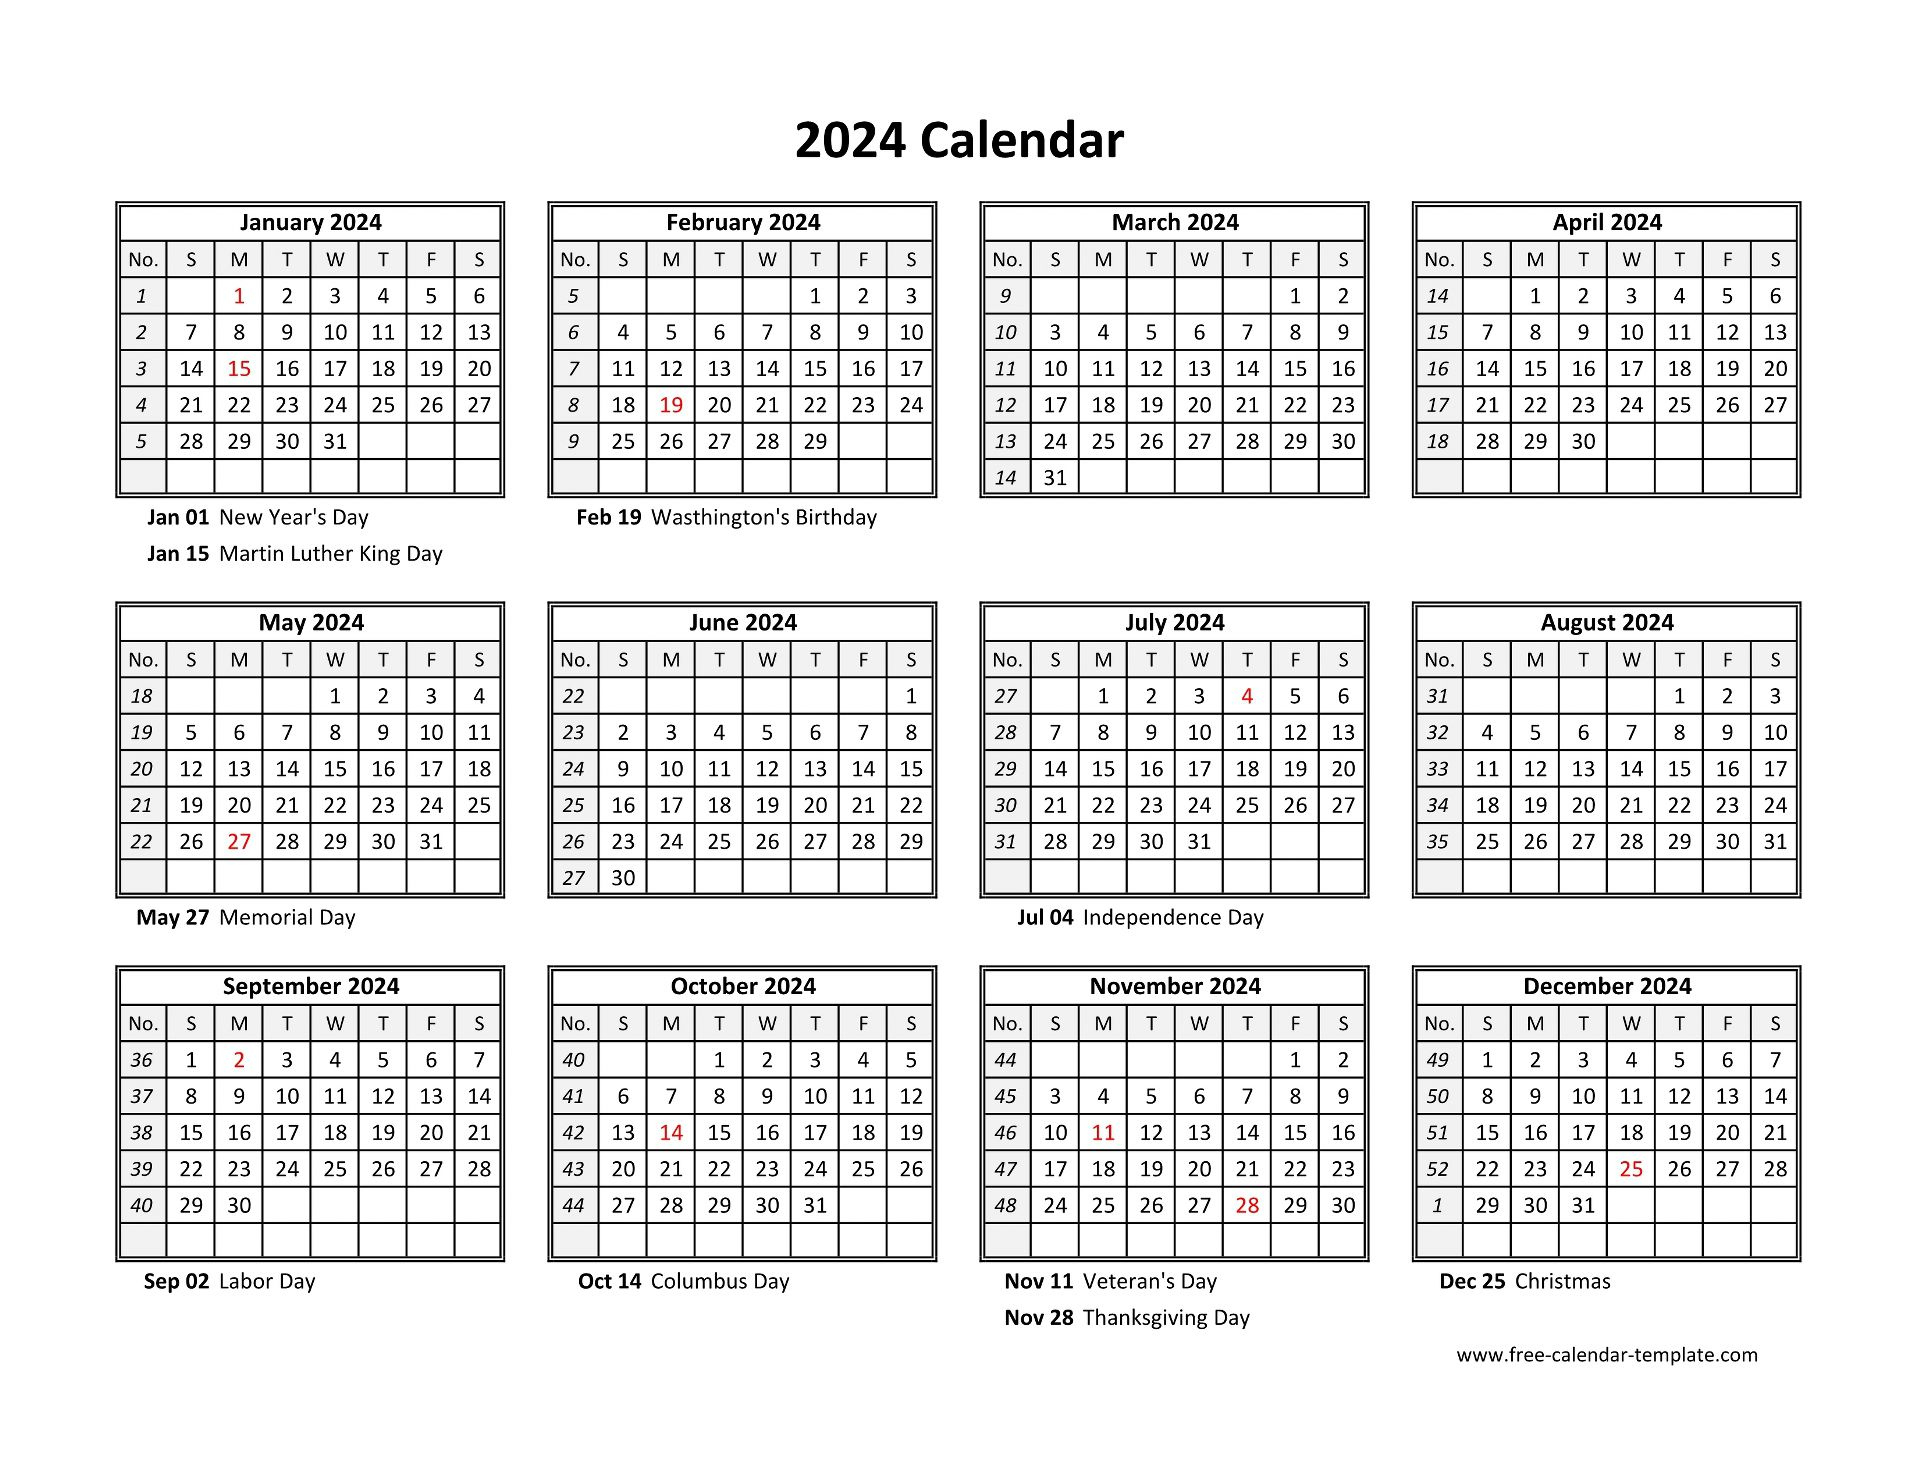 Yearly Calendar 2024 Printable With Federal Holidays | Free | Calendar 2024 Printable Free